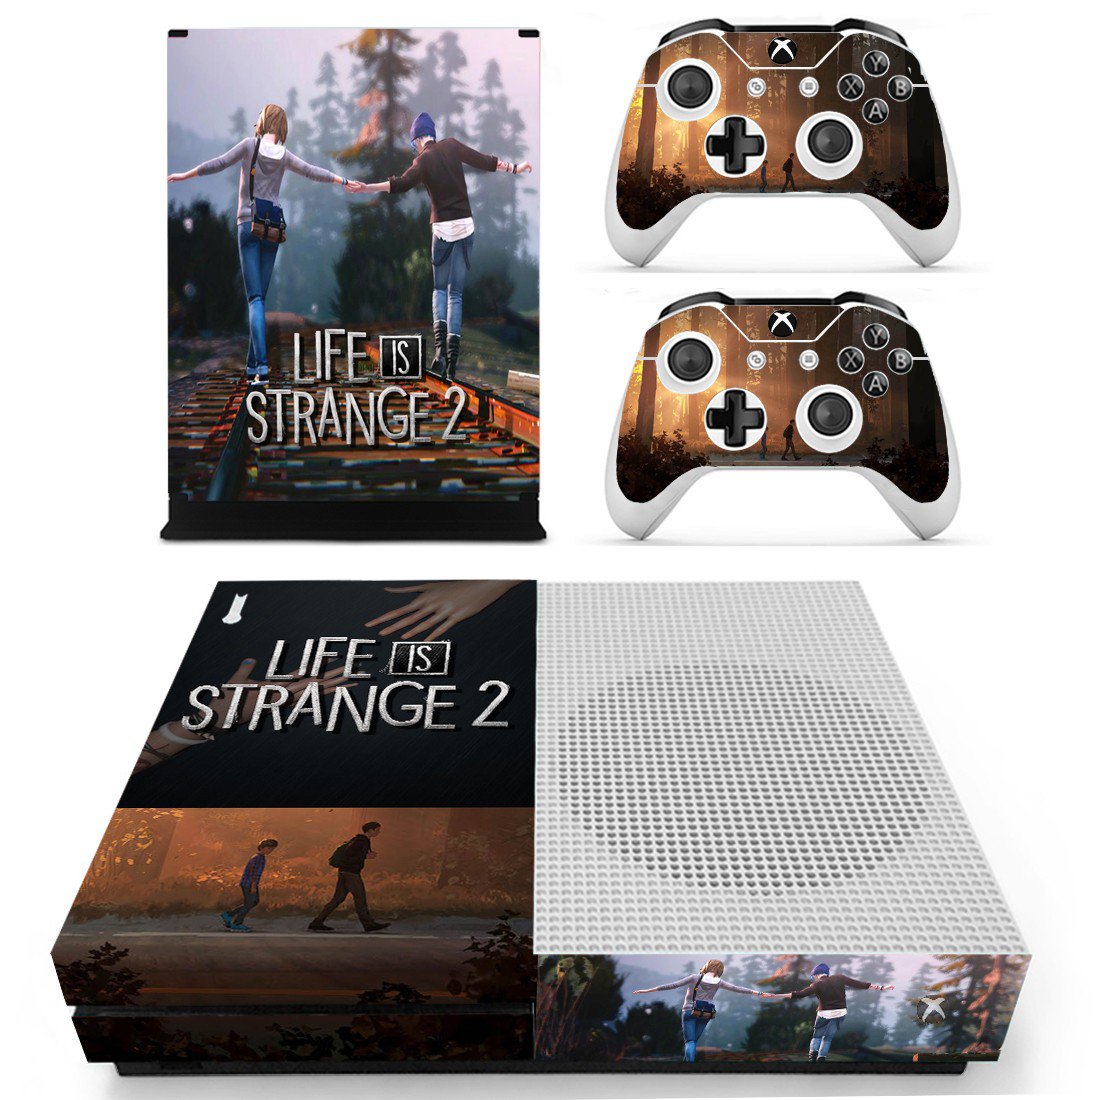 download life is strange xbox for free